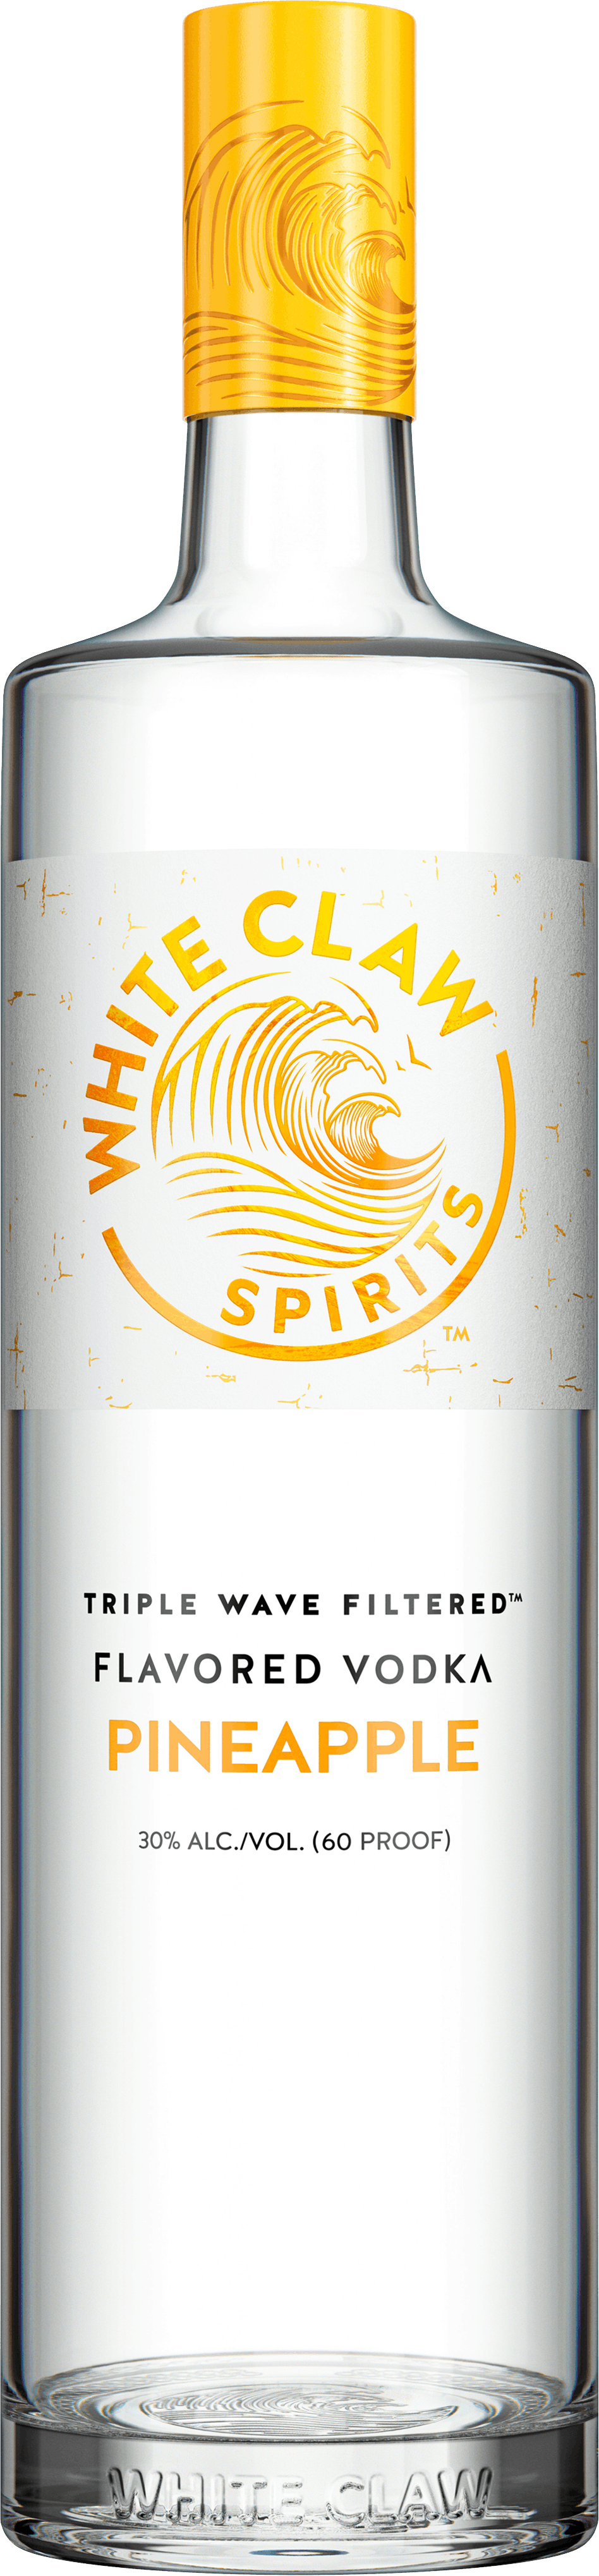 White Claw™ Flavored Vodka Pineapple. The bottle is over an image of a crashing wave.